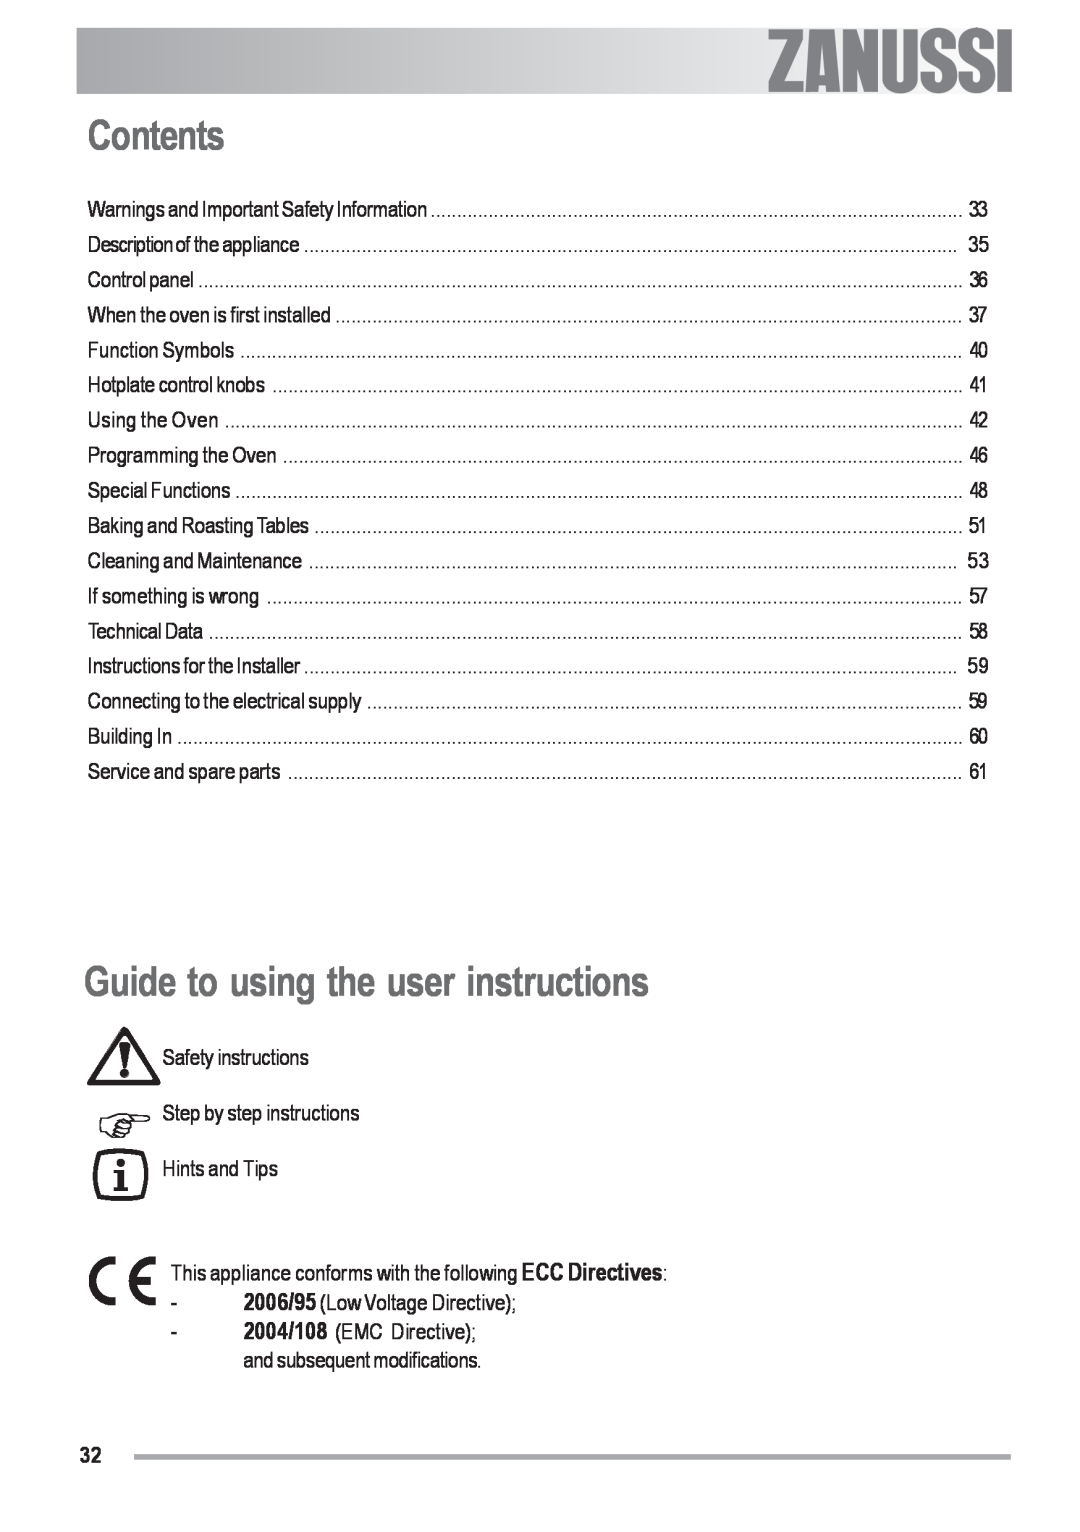 Zanussi ZOU 592 user manual Contents, Guide to using the user instructions, electrolux, Safety instructions 